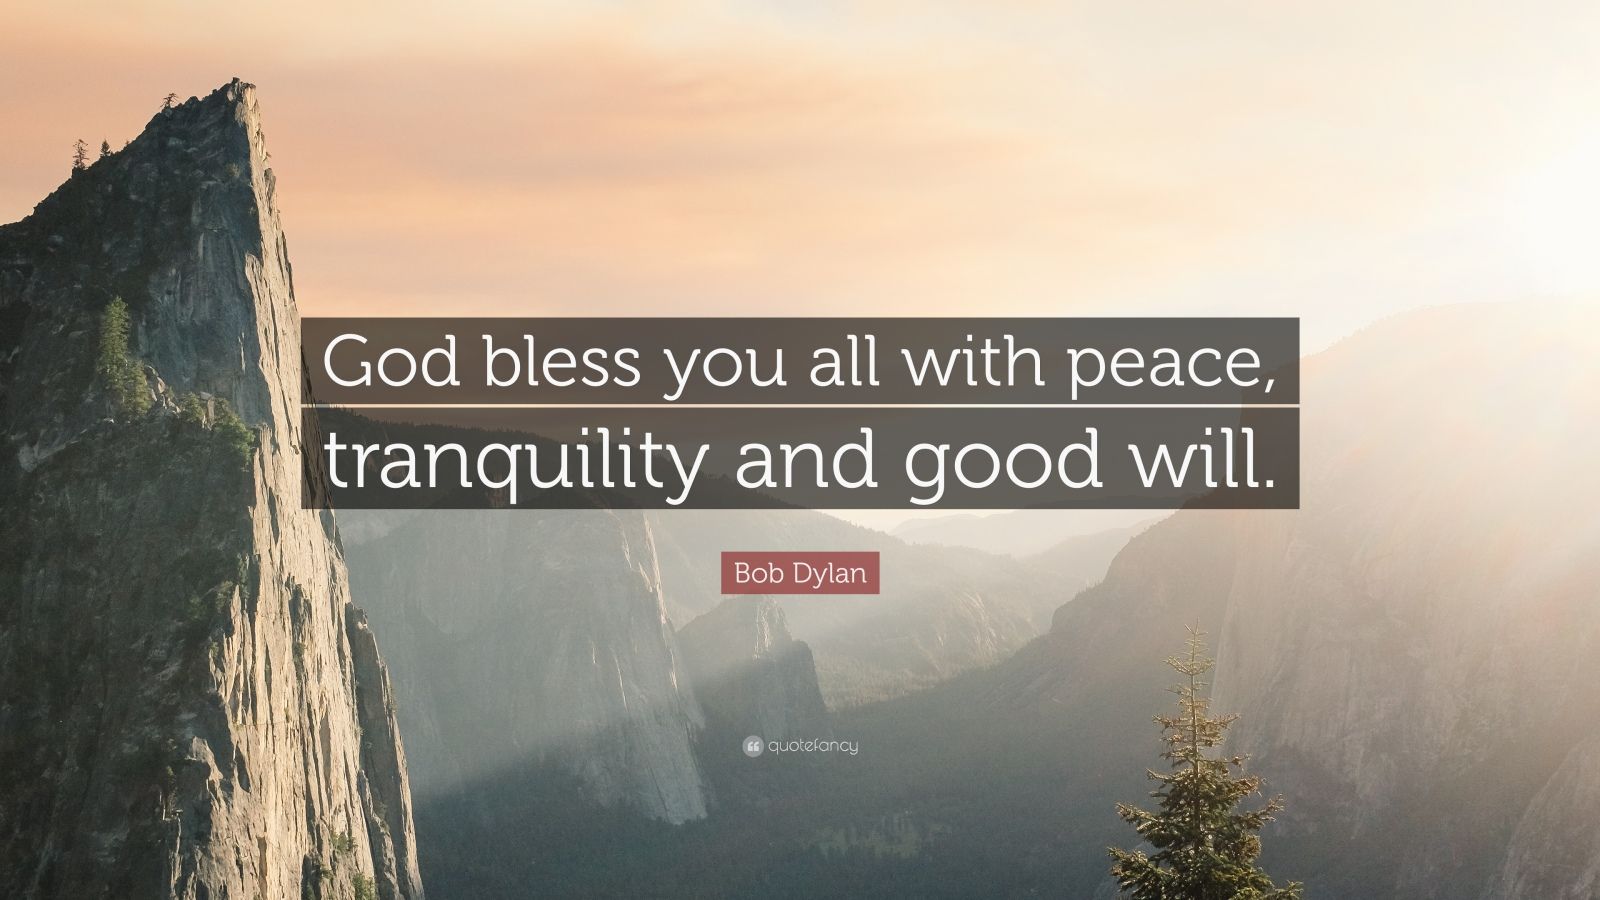 Bob Dylan Quote: "God bless you all with peace ...